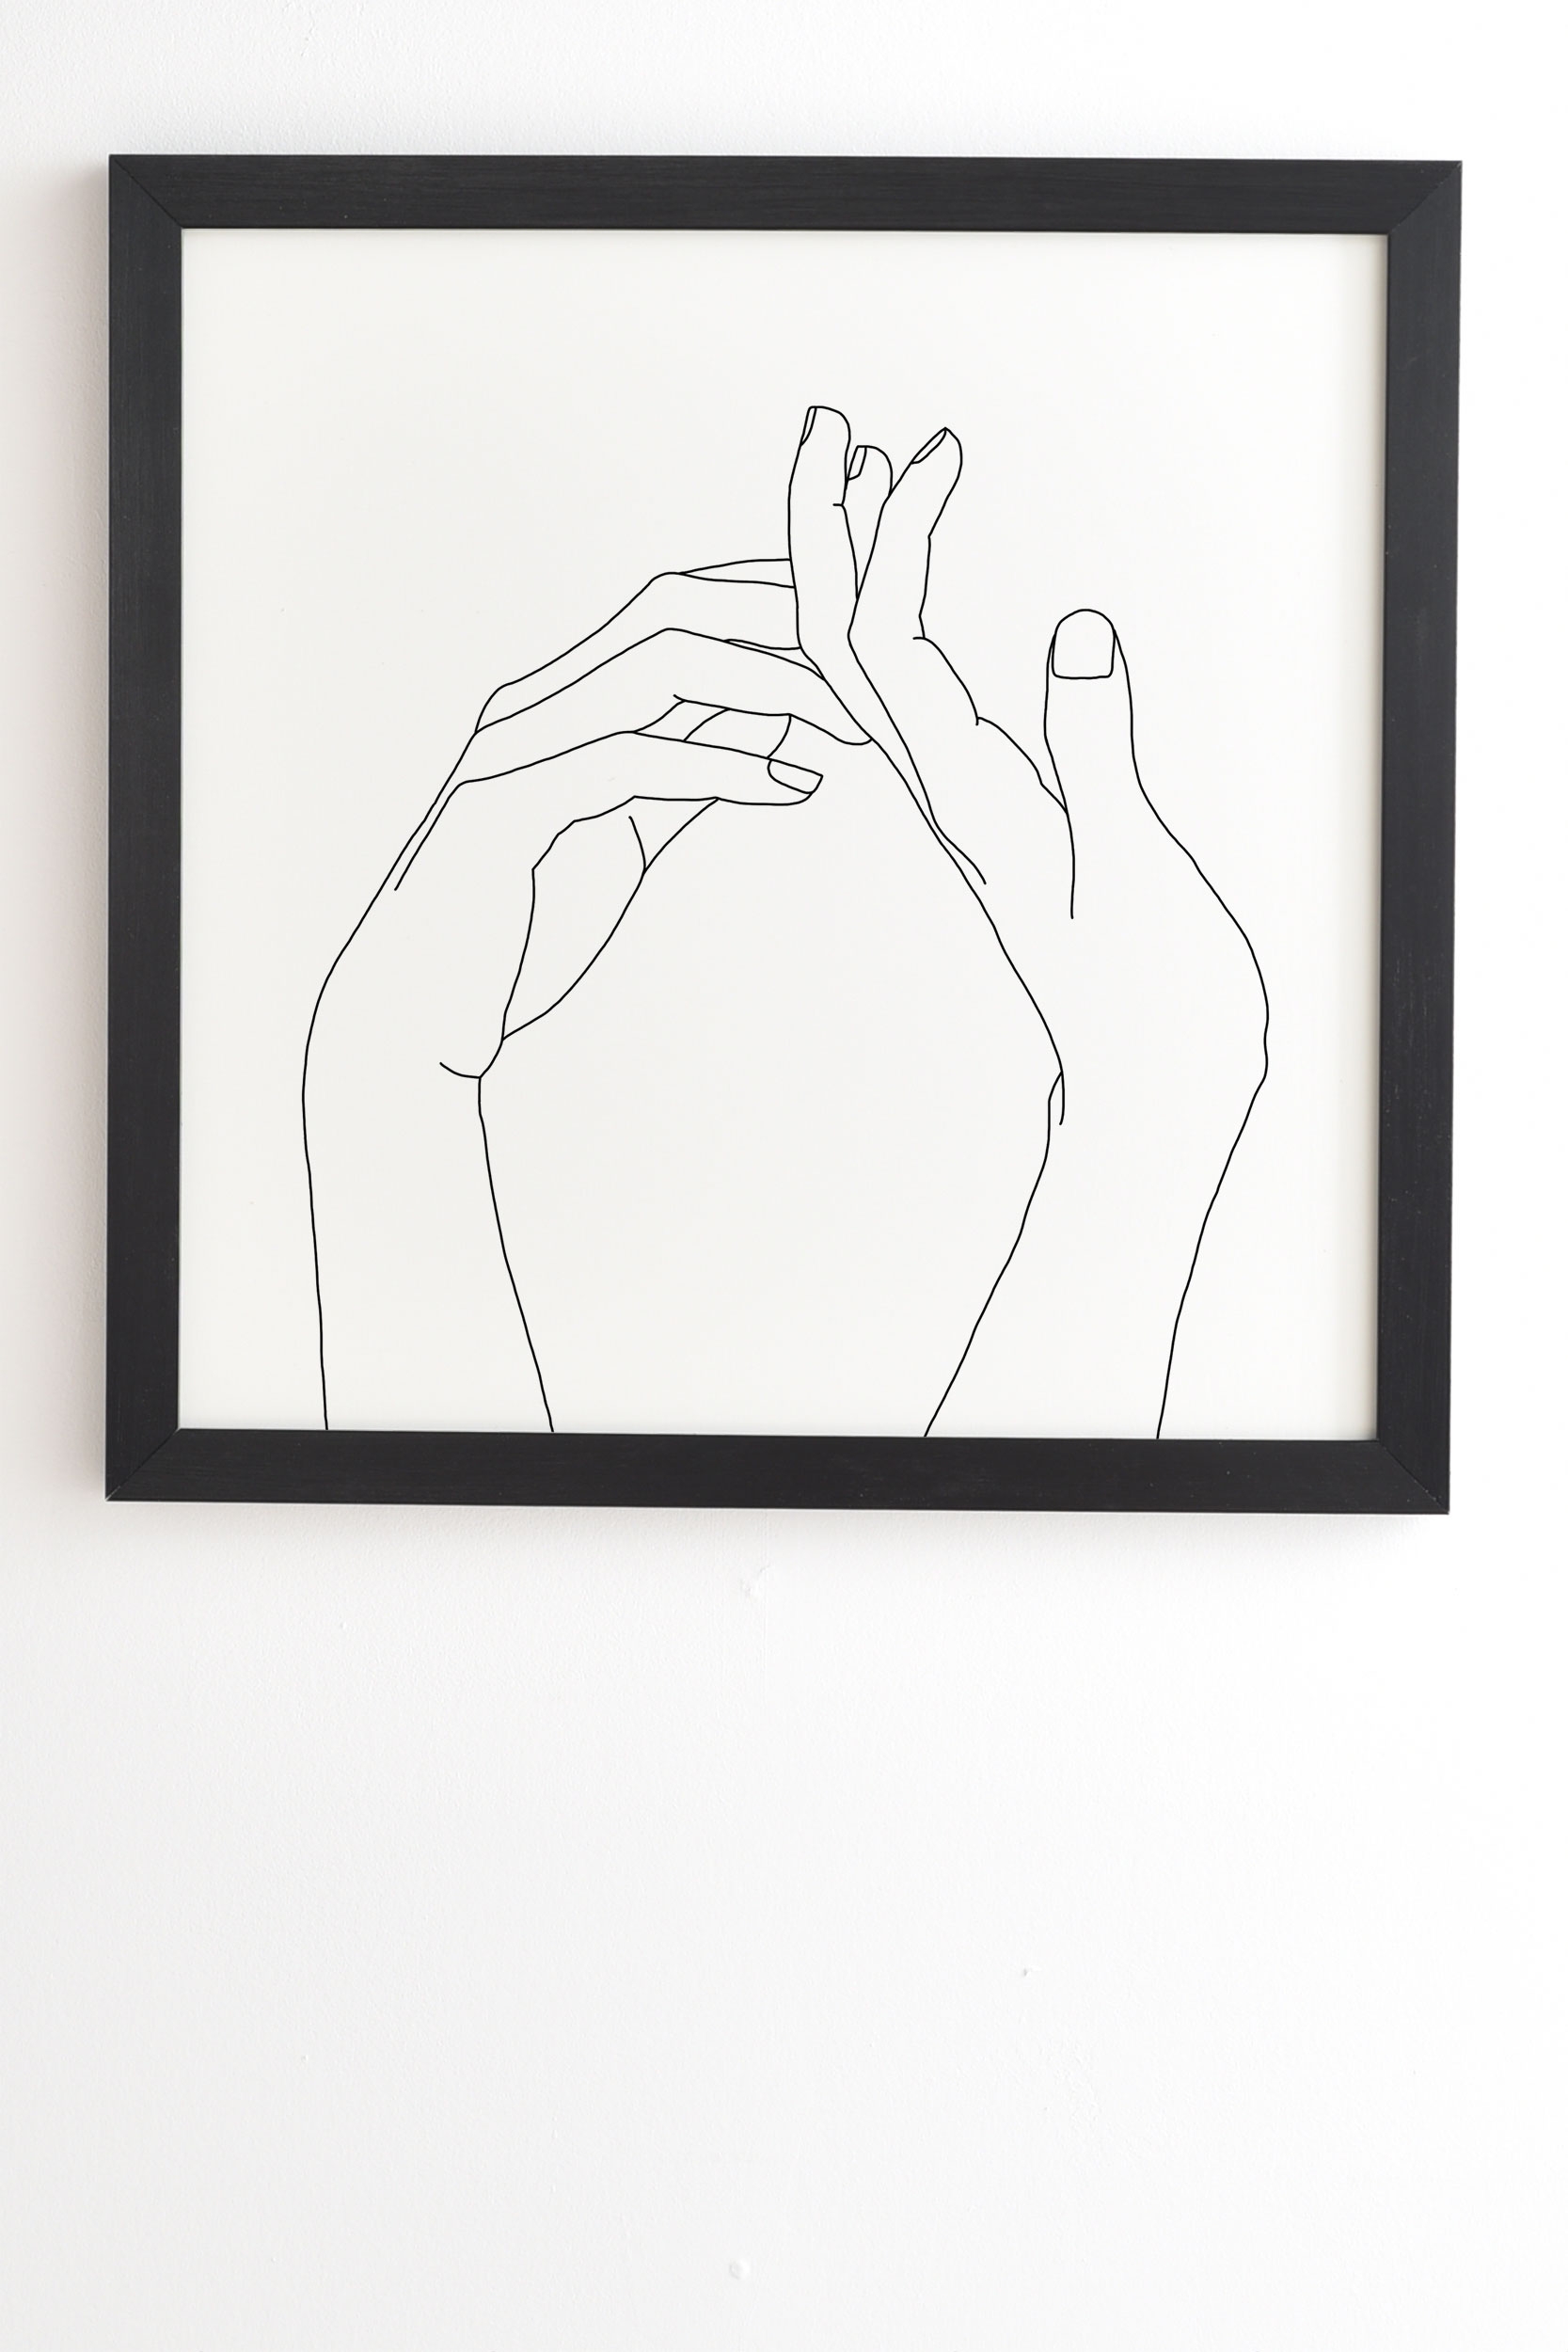 Hands Line Drawing Abi by The Colour Study - Framed Wall Art Basic Black 11" x 13" - Image 1